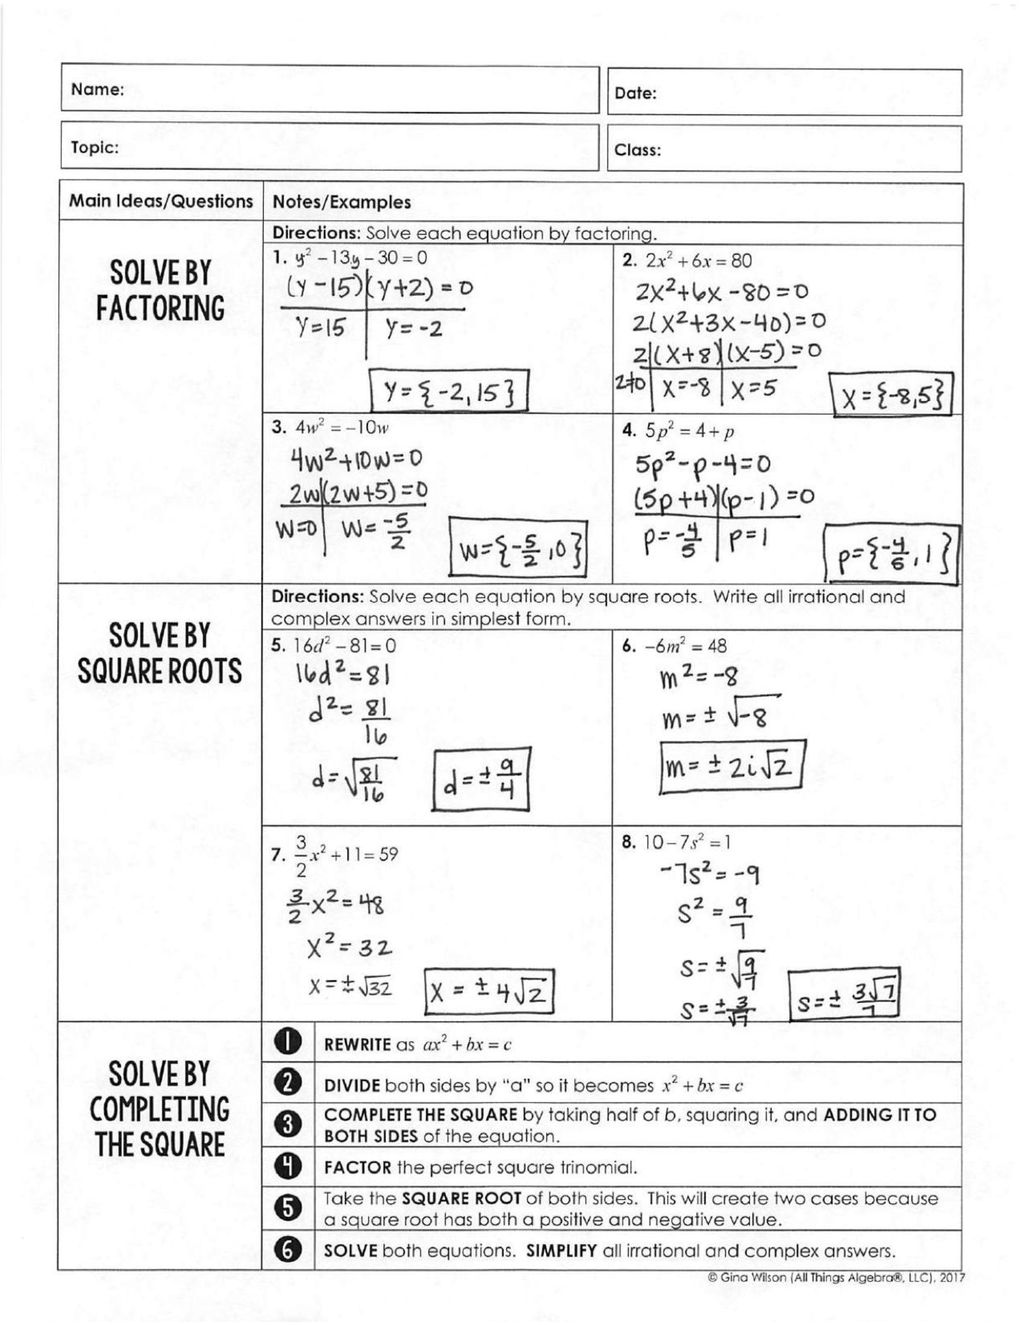 Review last weeks worksheets - ppt download Pertaining To Solving Equations By Factoring Worksheet